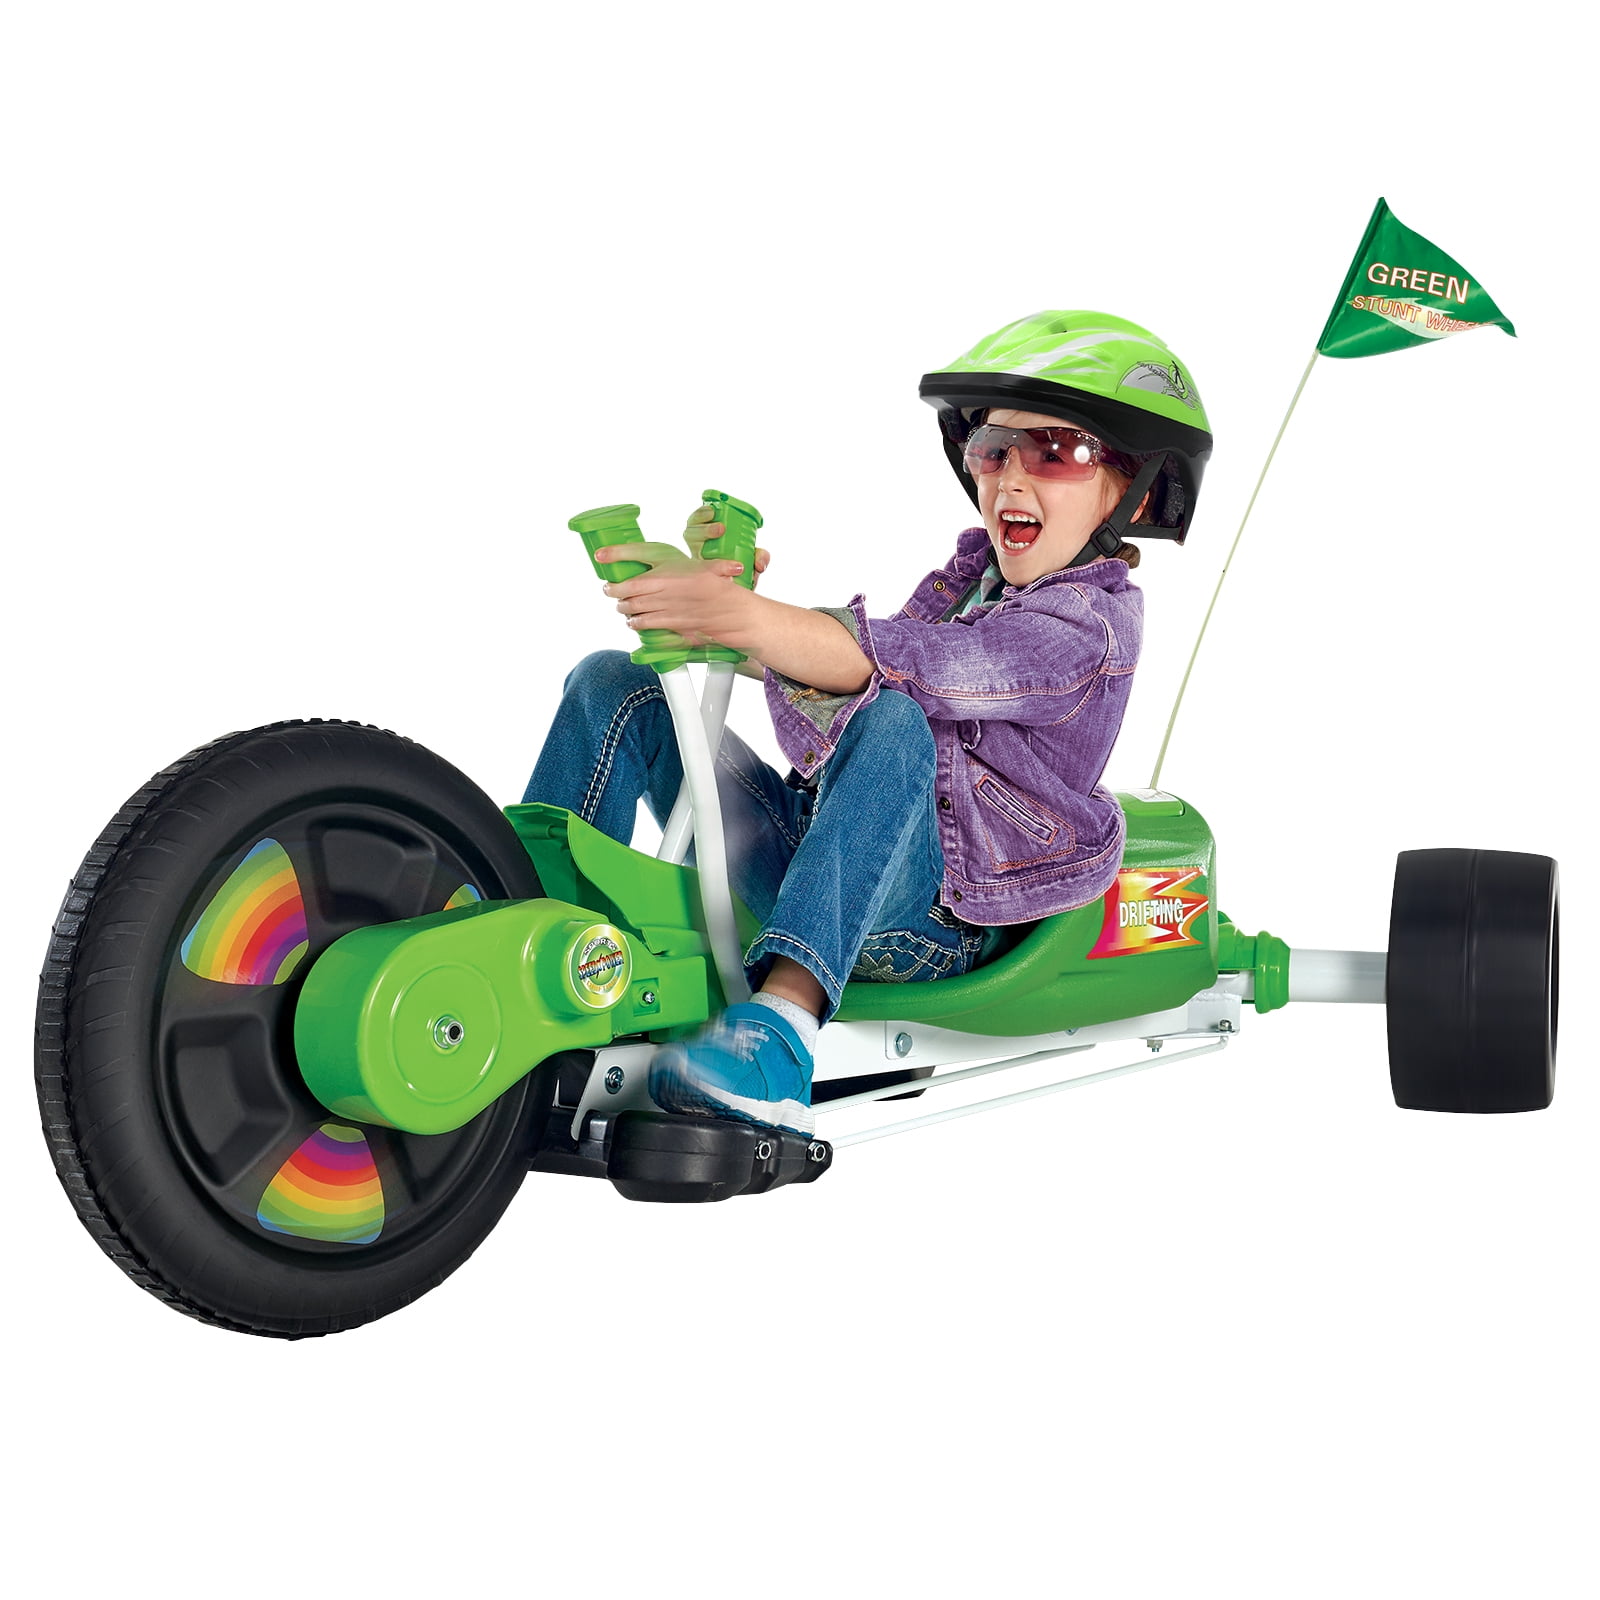 Open Box Details about   BERG Buzzy BSX Kids Pedal Go Kart Ride On Toy with Axle Steering 